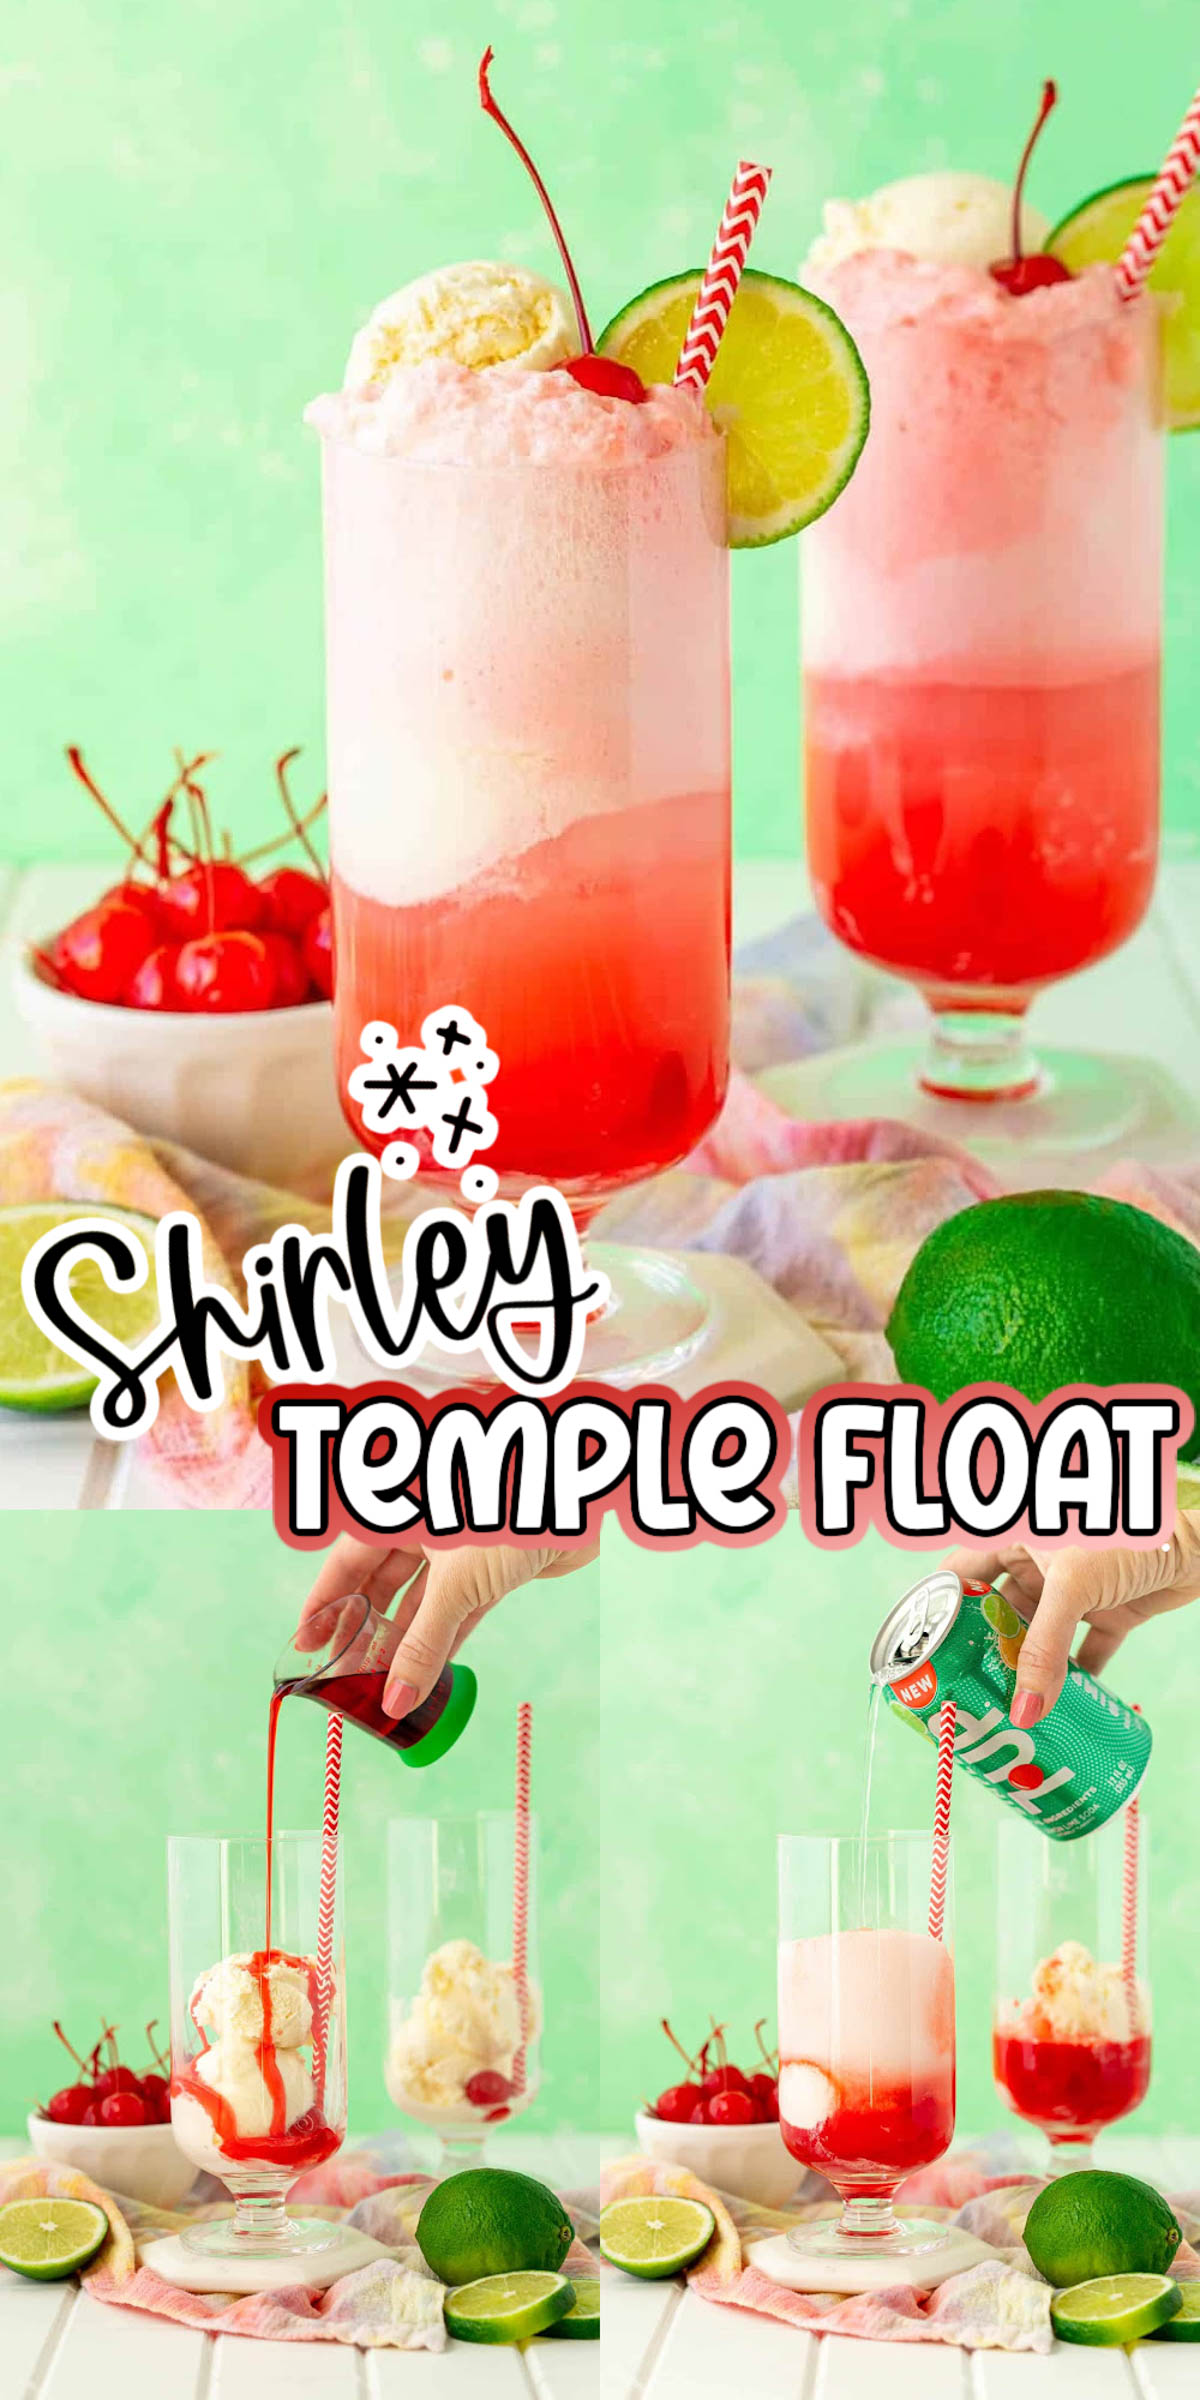 This Shirley Temple Float is a fun twist on the classic mocktail! Creamy vanilla ice cream is mixed with grenadine syrup and lemon-lime soda for a refreshingly sweet dessert beverage. via @sugarandsoulco